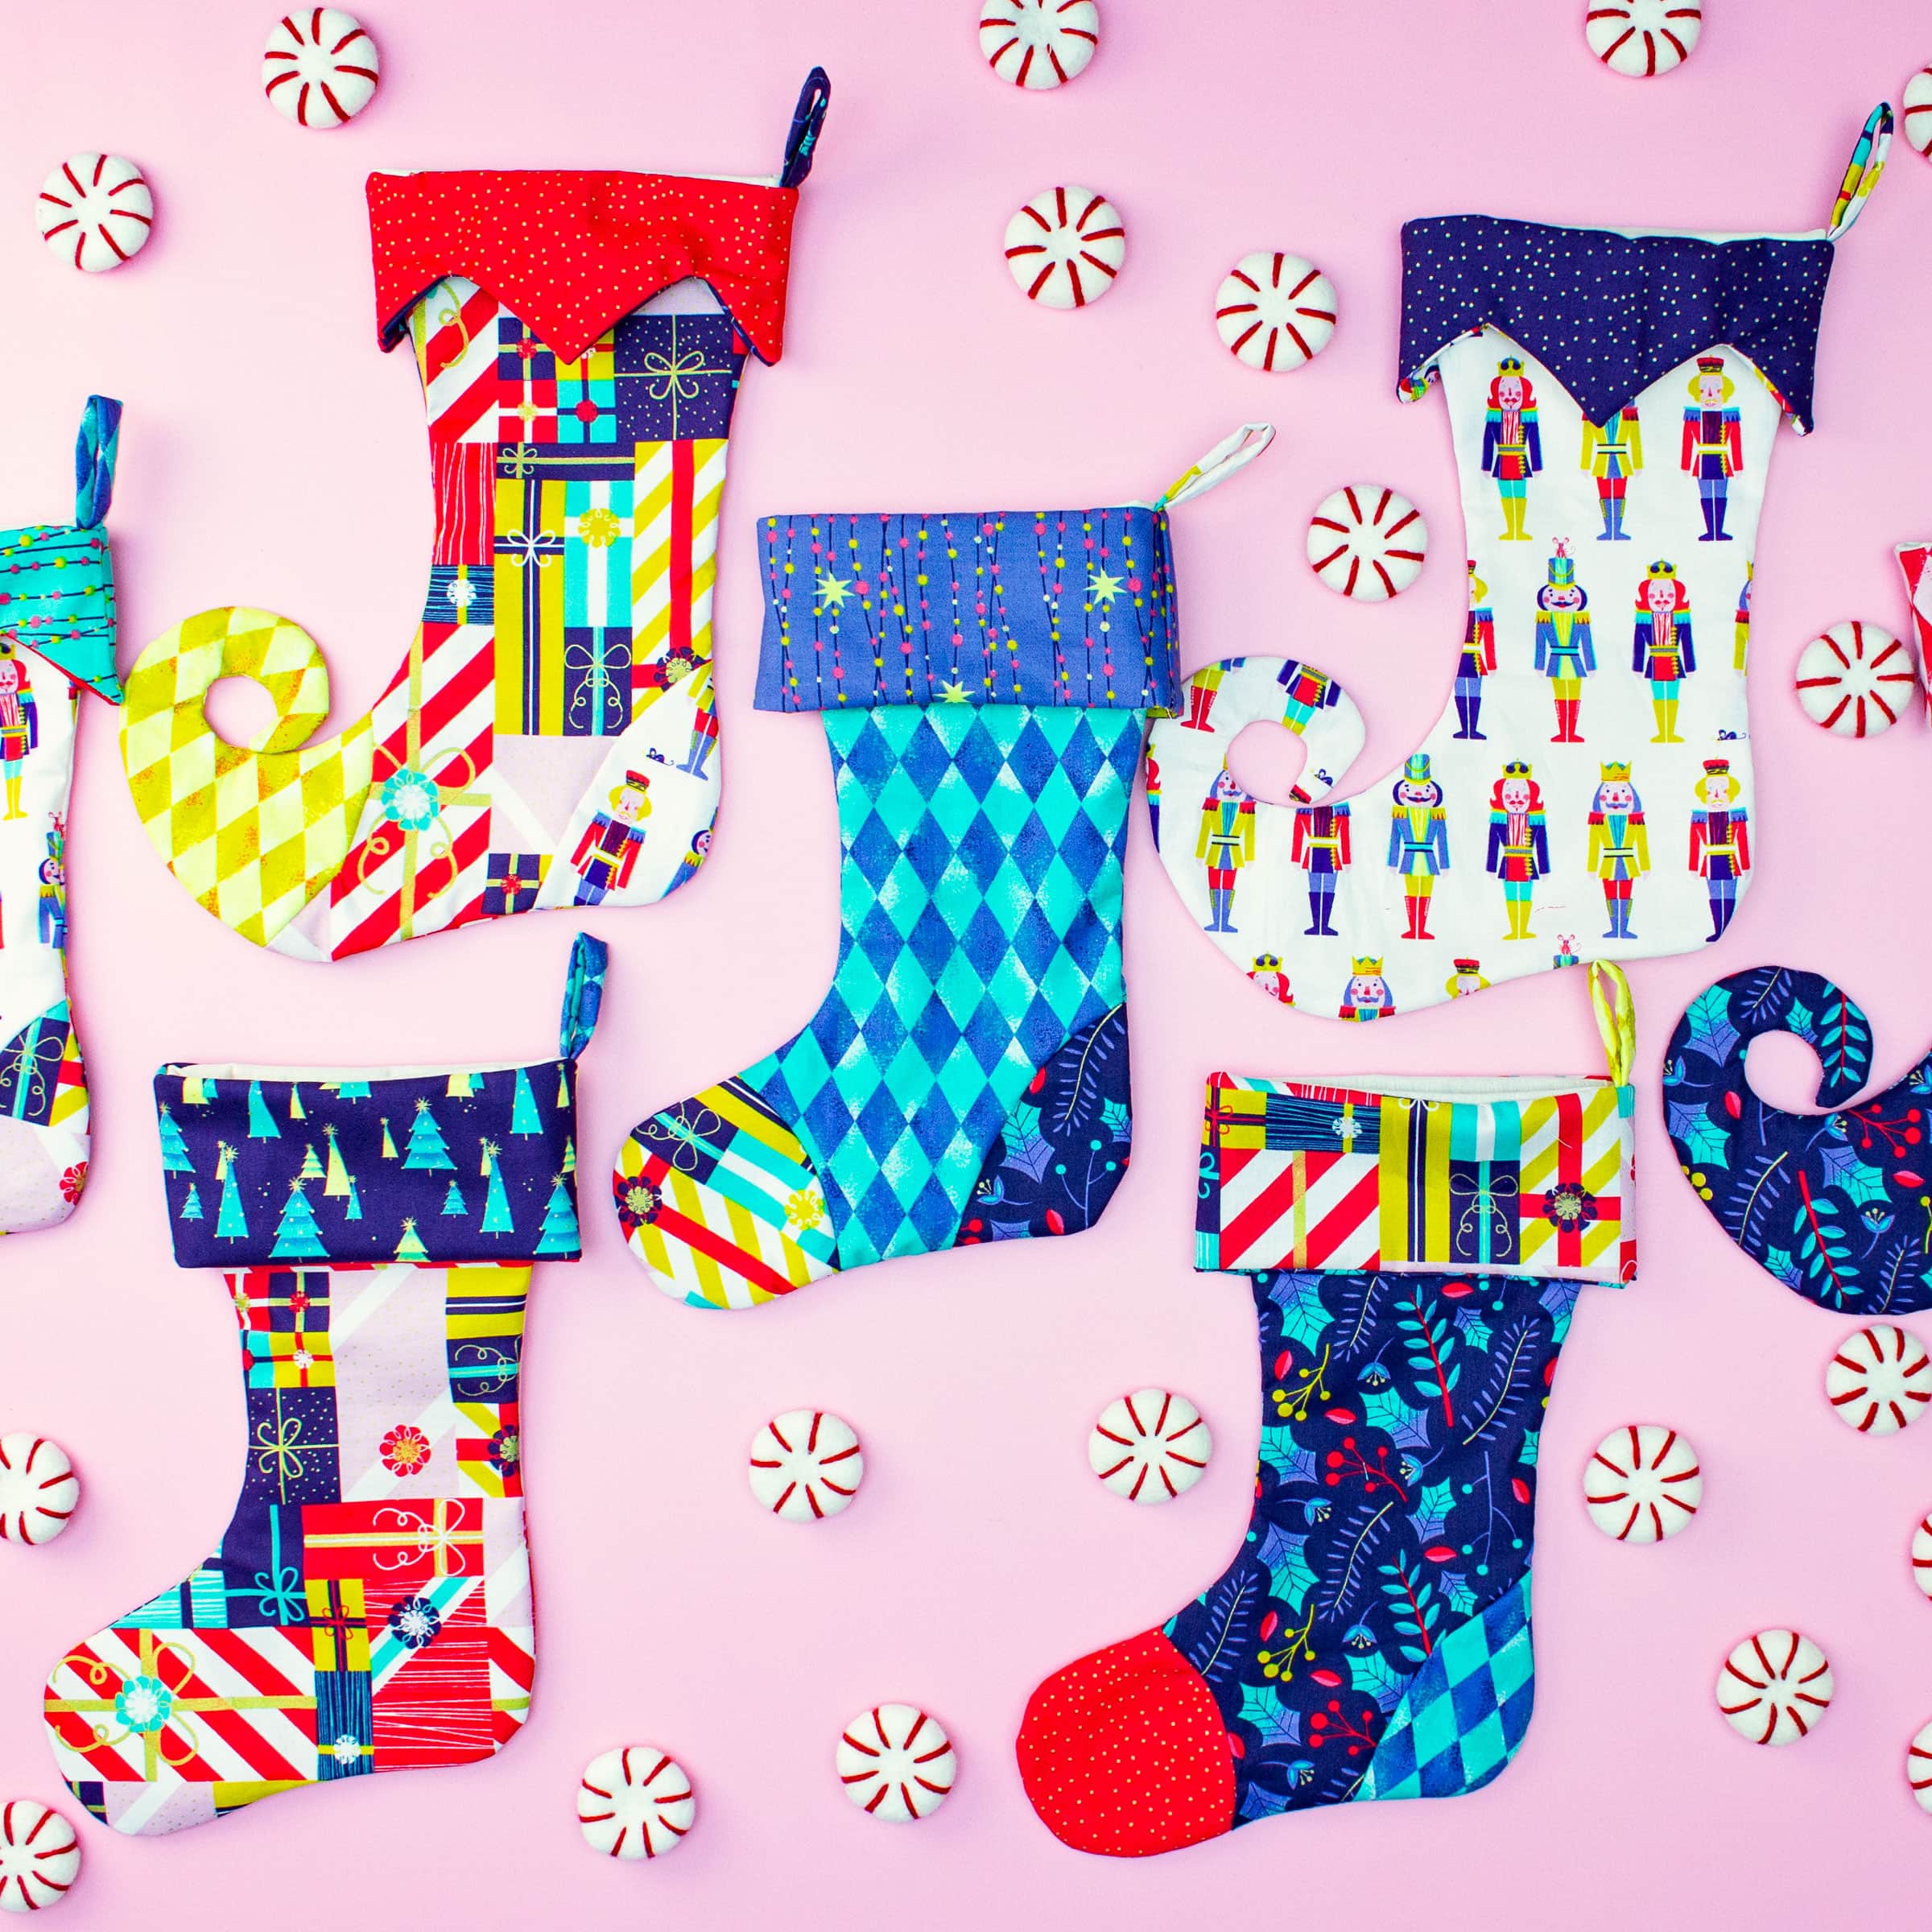 How to Make a Christmas Stocking (free pattern/ template)